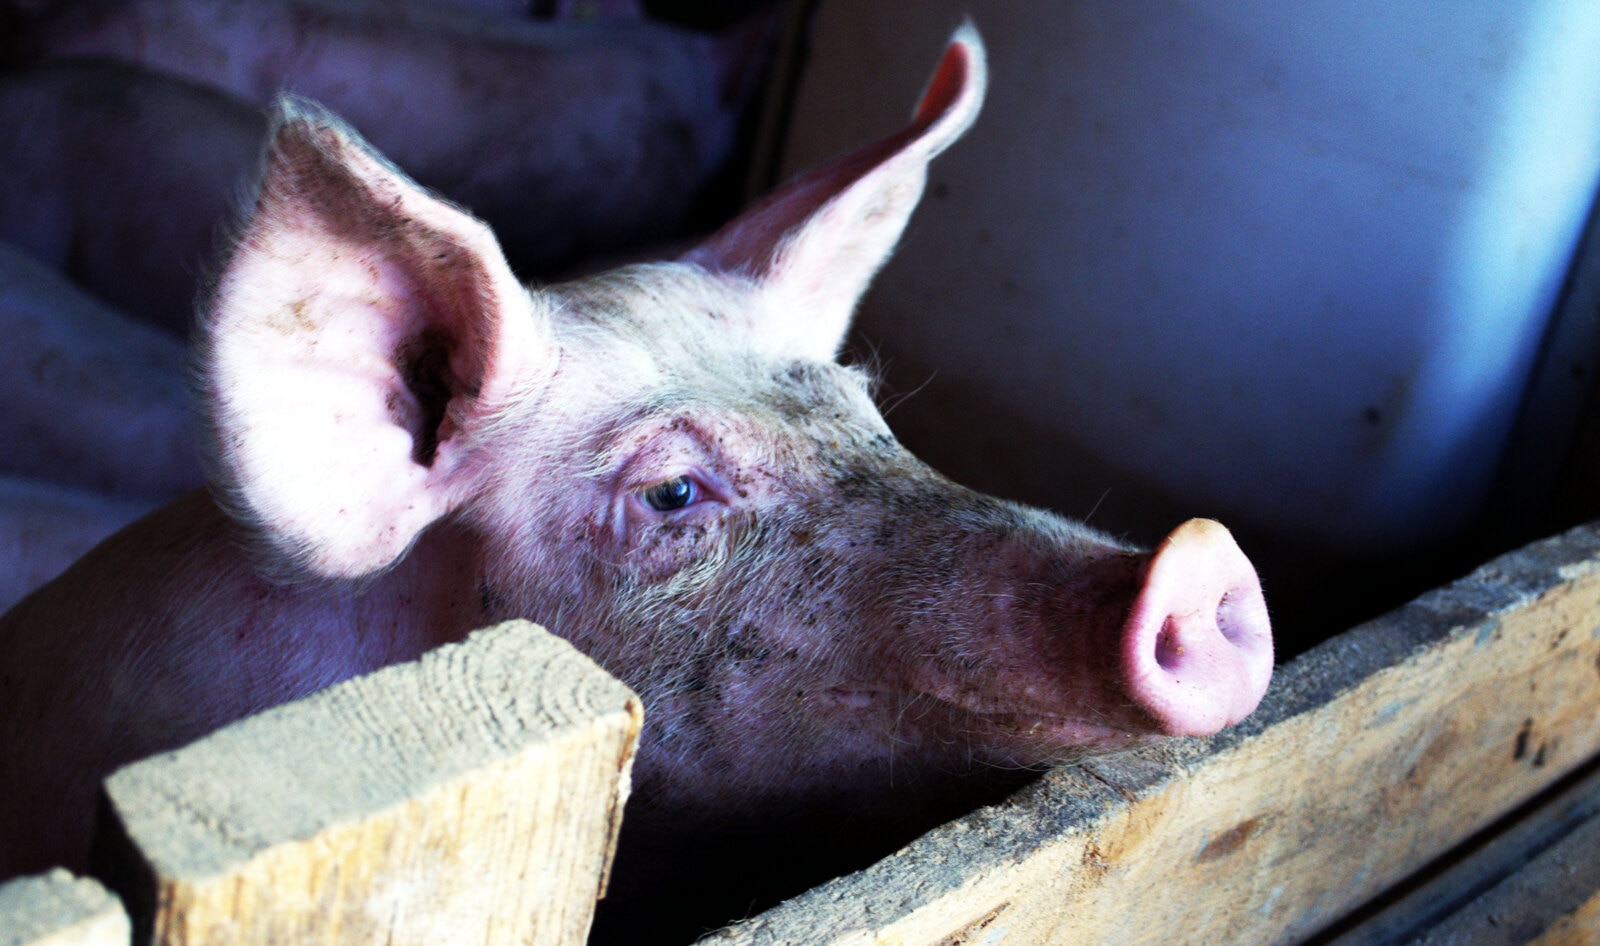 Animal-Rights Coalition Sues USDA for Failing to Protect Sick Pigs